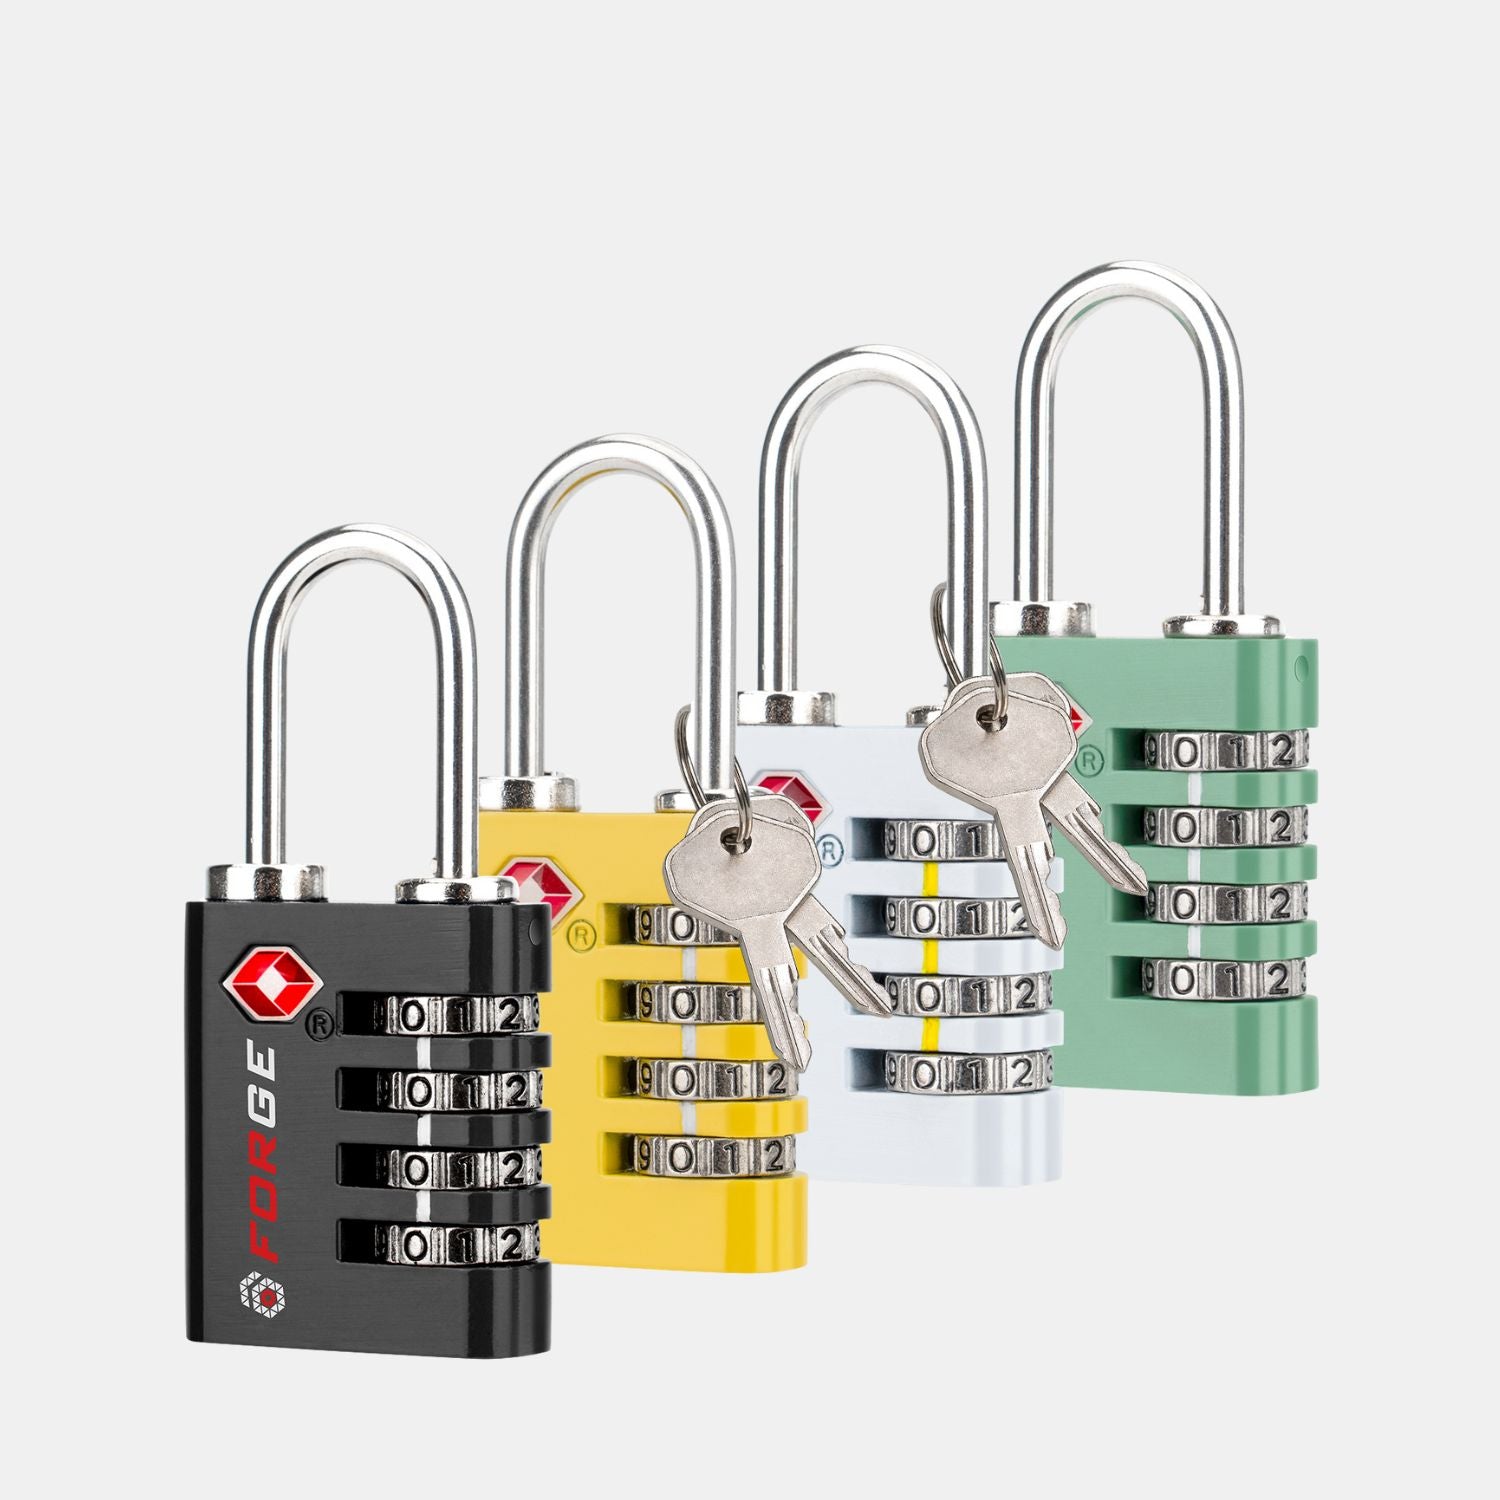 Dual-Opening TSA Approved Luggage Lock: Key or Combination Access, Heavy Duty. 4 Color Locks